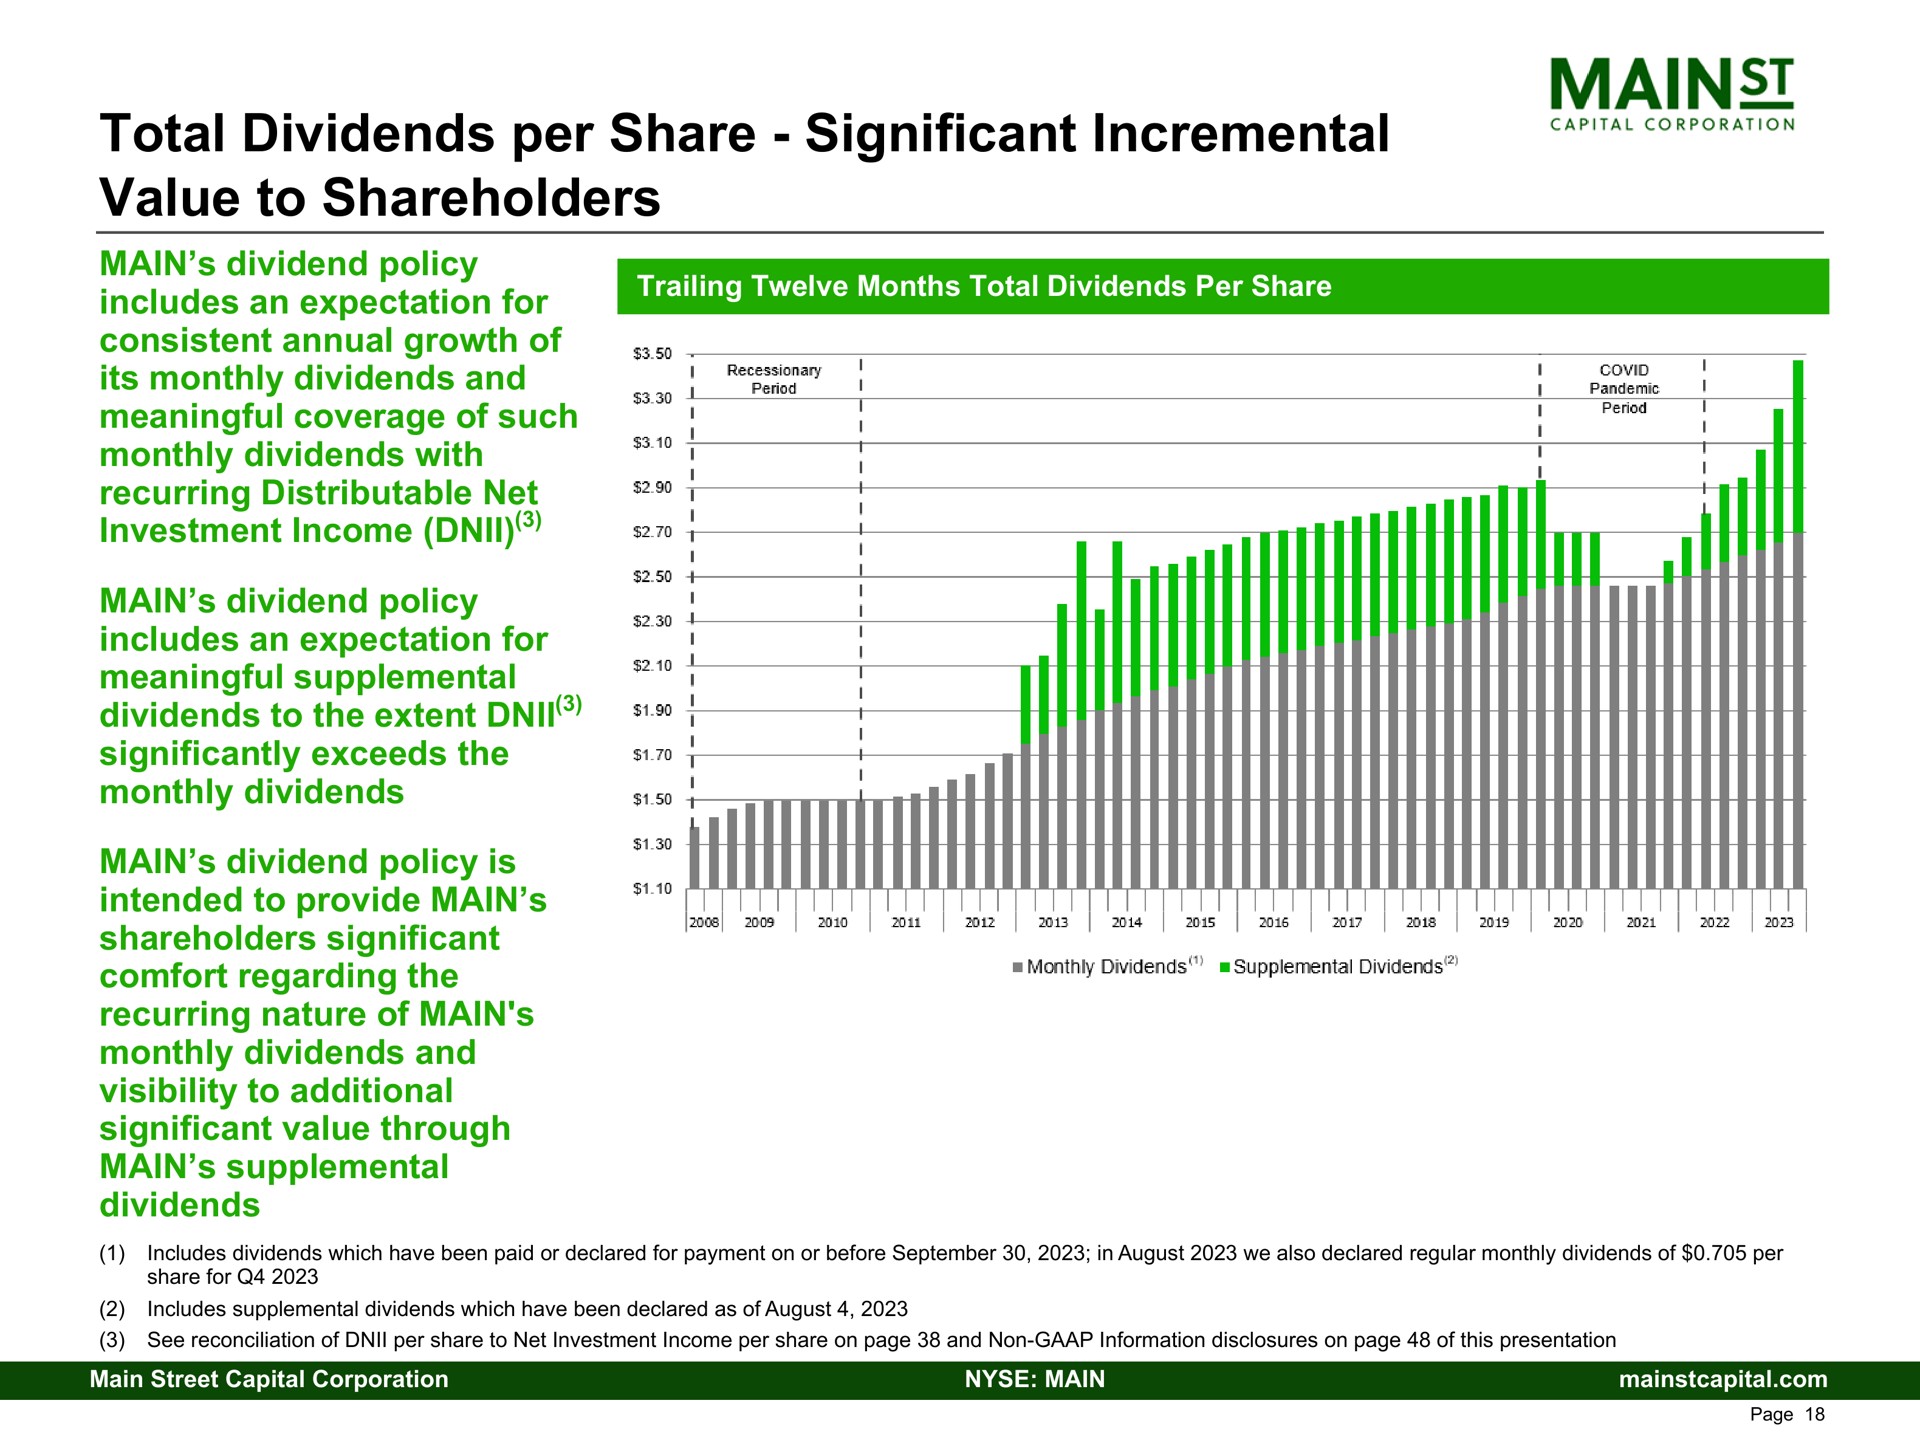 total dividends per share significant incremental value to shareholders i tut extent a a main dividend policy is | Main Street Capital